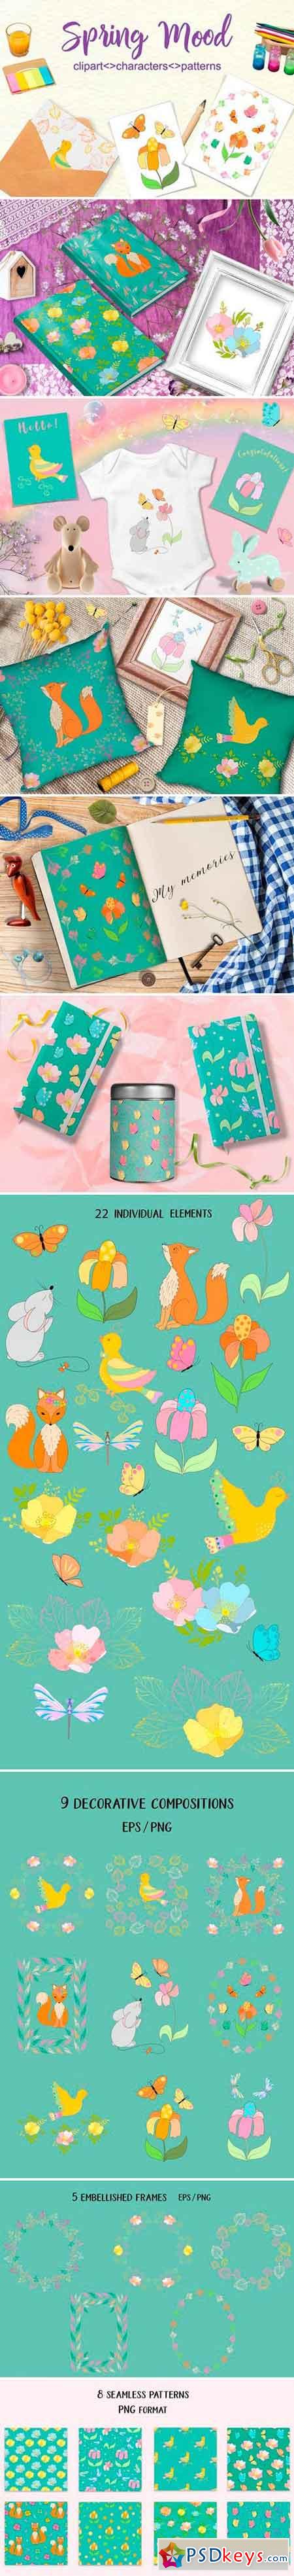 Spring Mood ClipArt 2515444